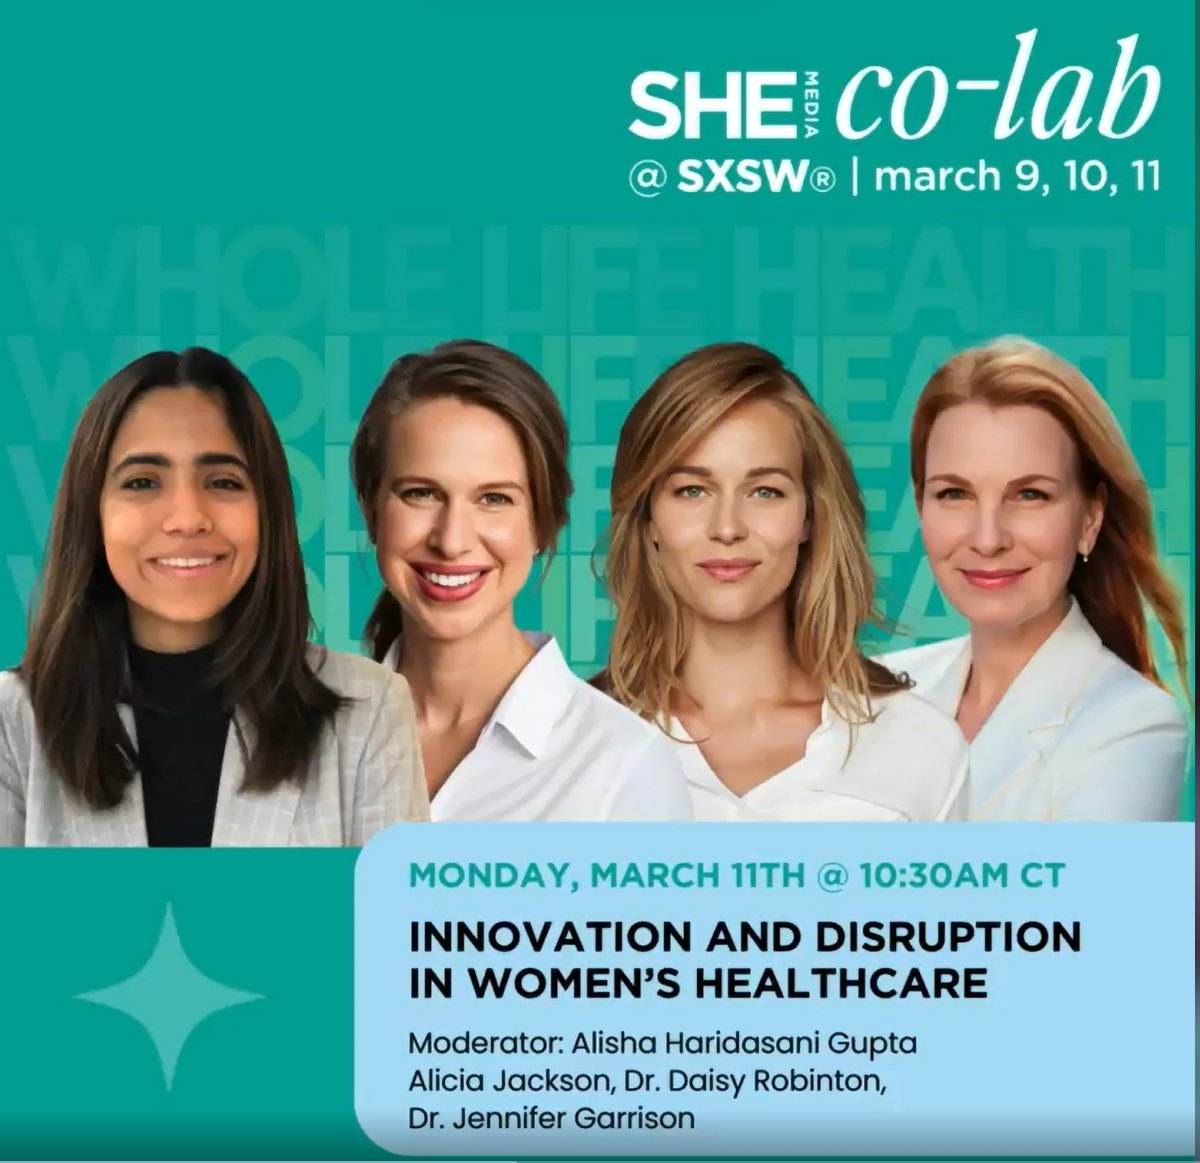 Excited to talk about disruptions in women's health Monday during @SXSW at the #SHEMedia Co-Lab with @DaisyRobinton, @Aliciajackson1, and Alisha Haridasani Gupta 🤩 Wild progress over the past few weeks, let's keep this going! RSVP here: bit.ly/3uV3E6X @SheKnowsMedia